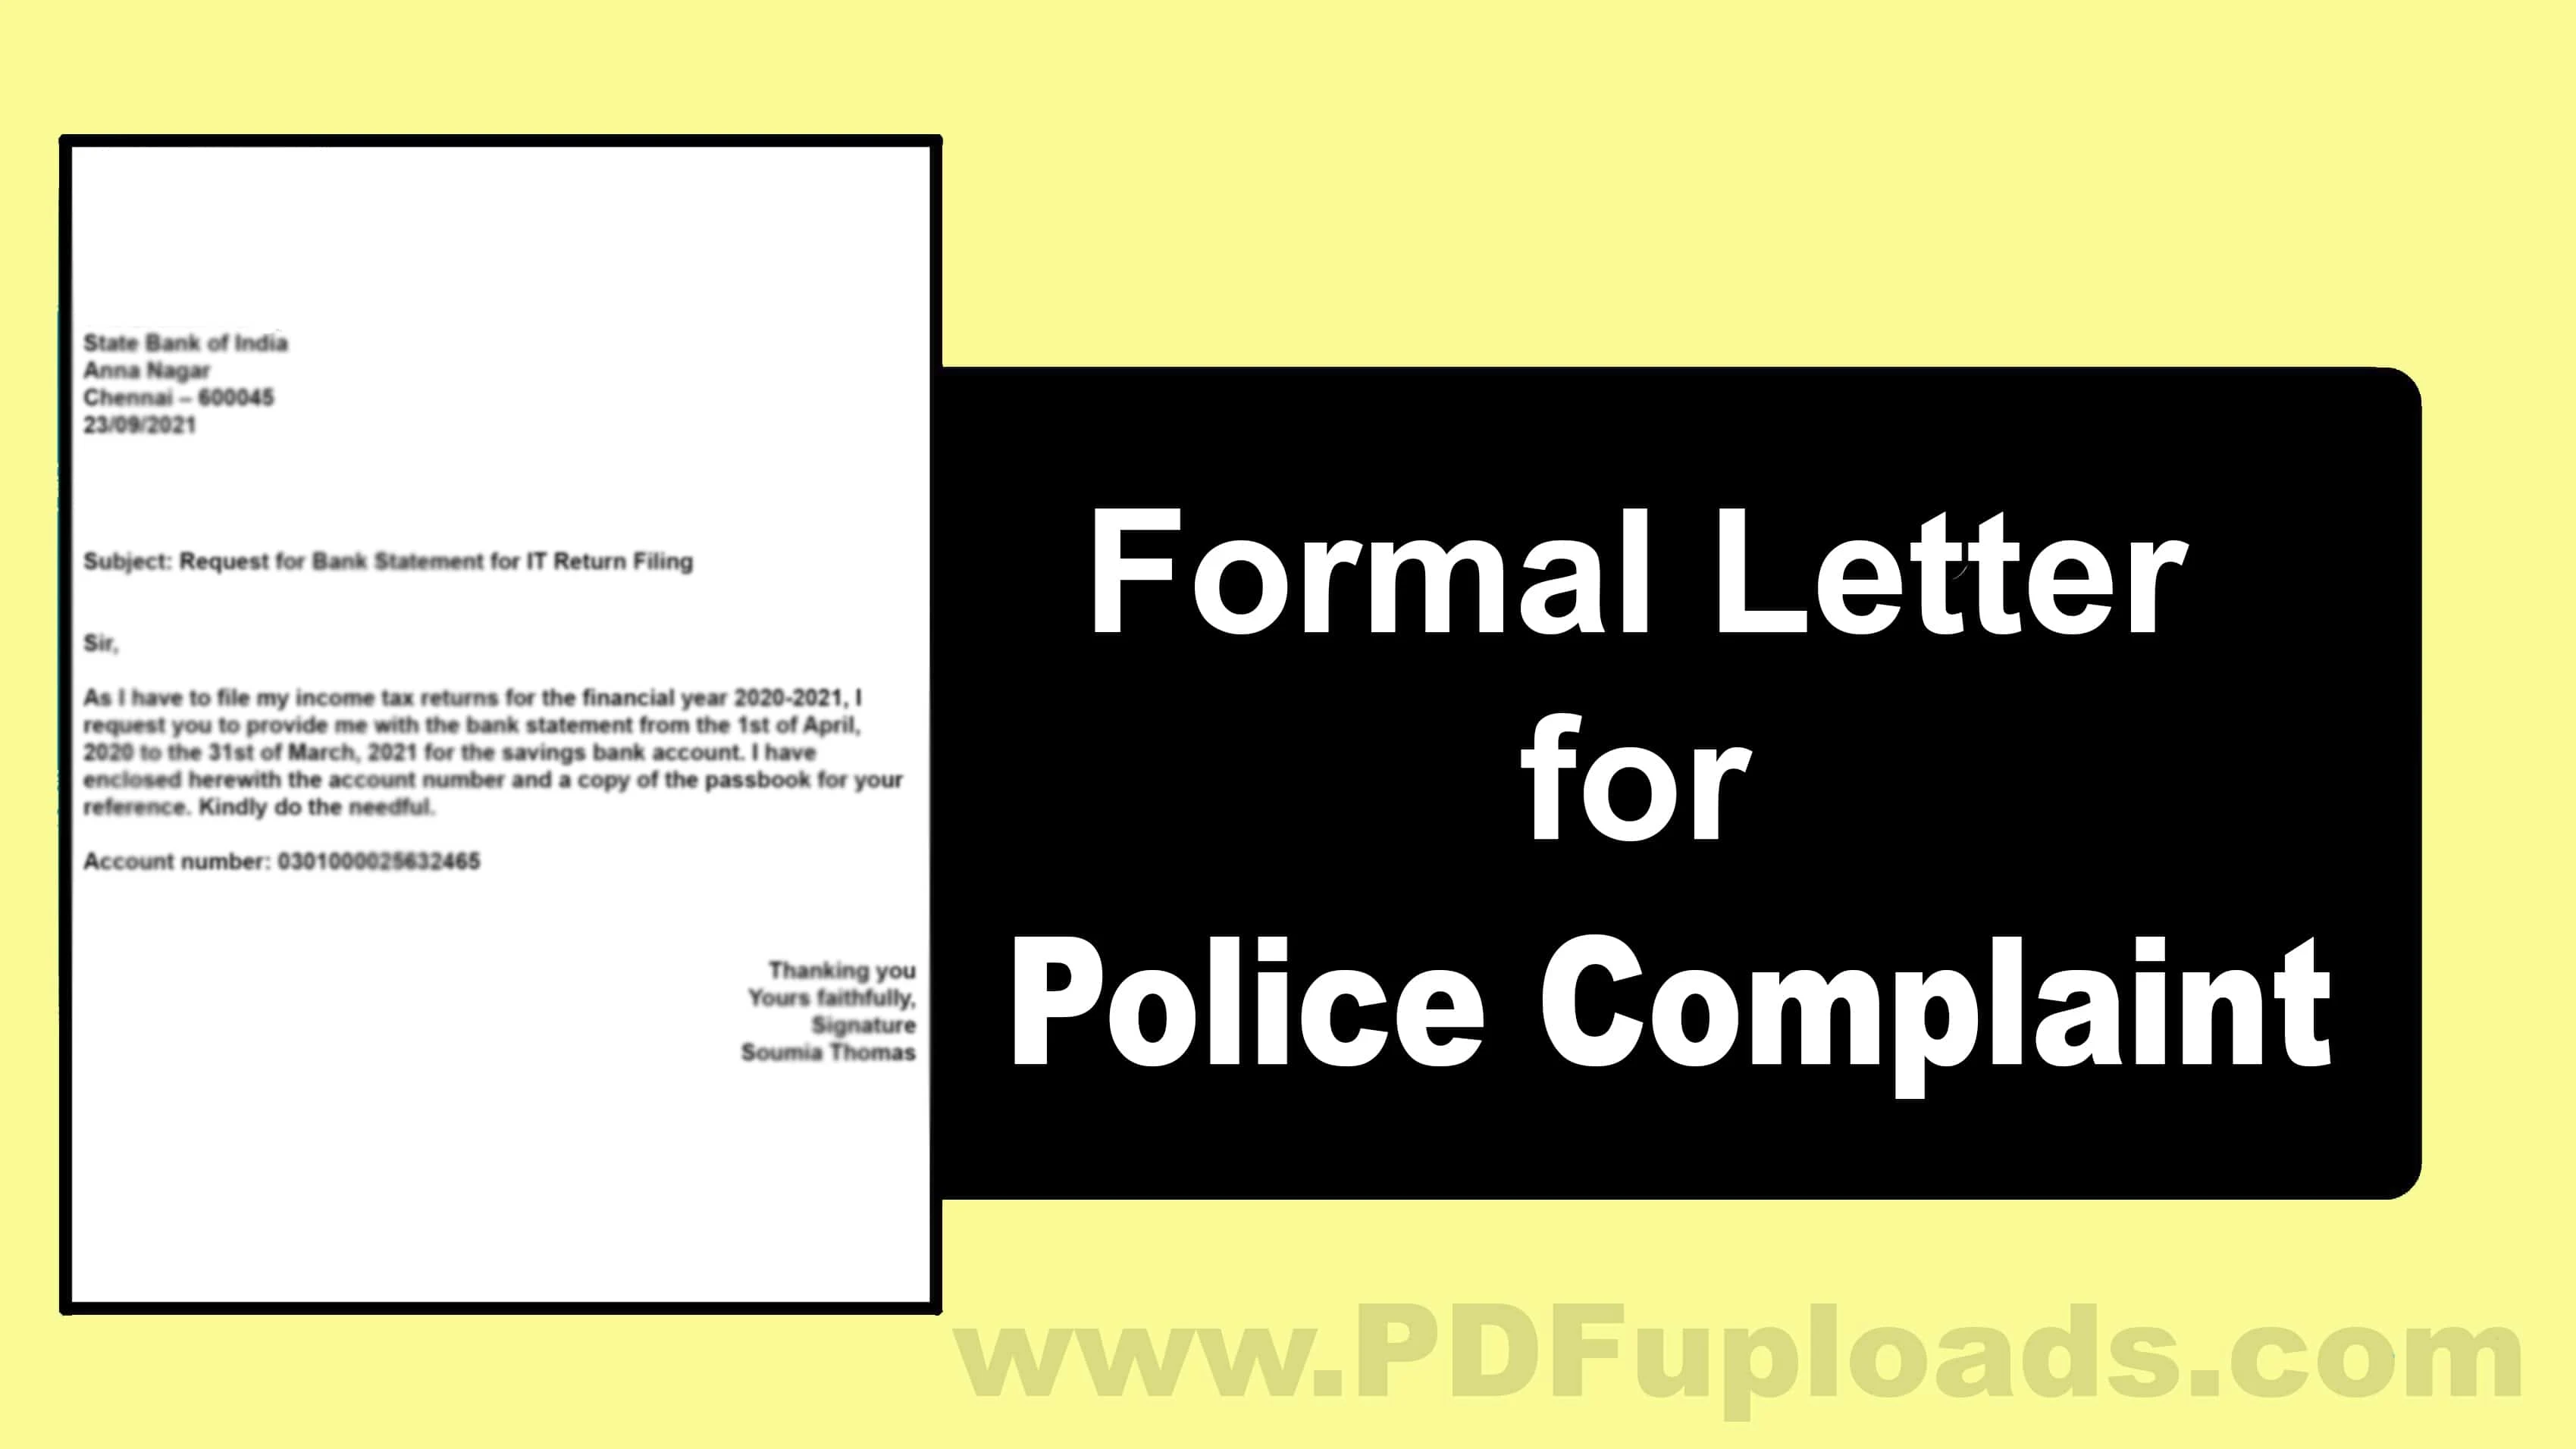 How to write Police Complaint Formal Letter │How to Write, Points to Remember, Format and Sample